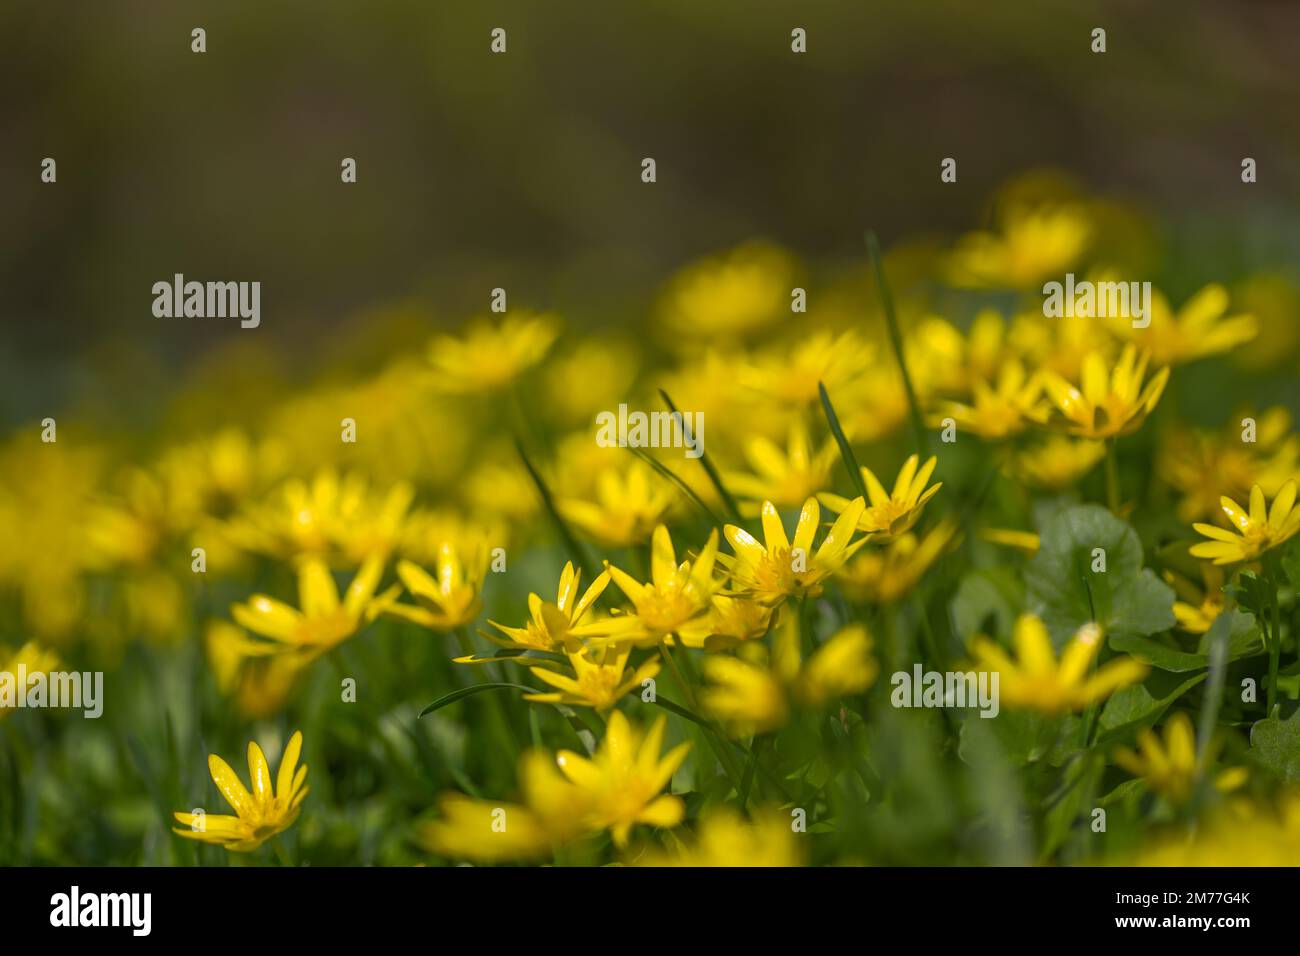 Ficaria verna, Ranunculus ficaria L., lesser celandine or pilewort, fig buttercup yellow flowers with green leaves in a clearing in the spring. Spring Stock Photo